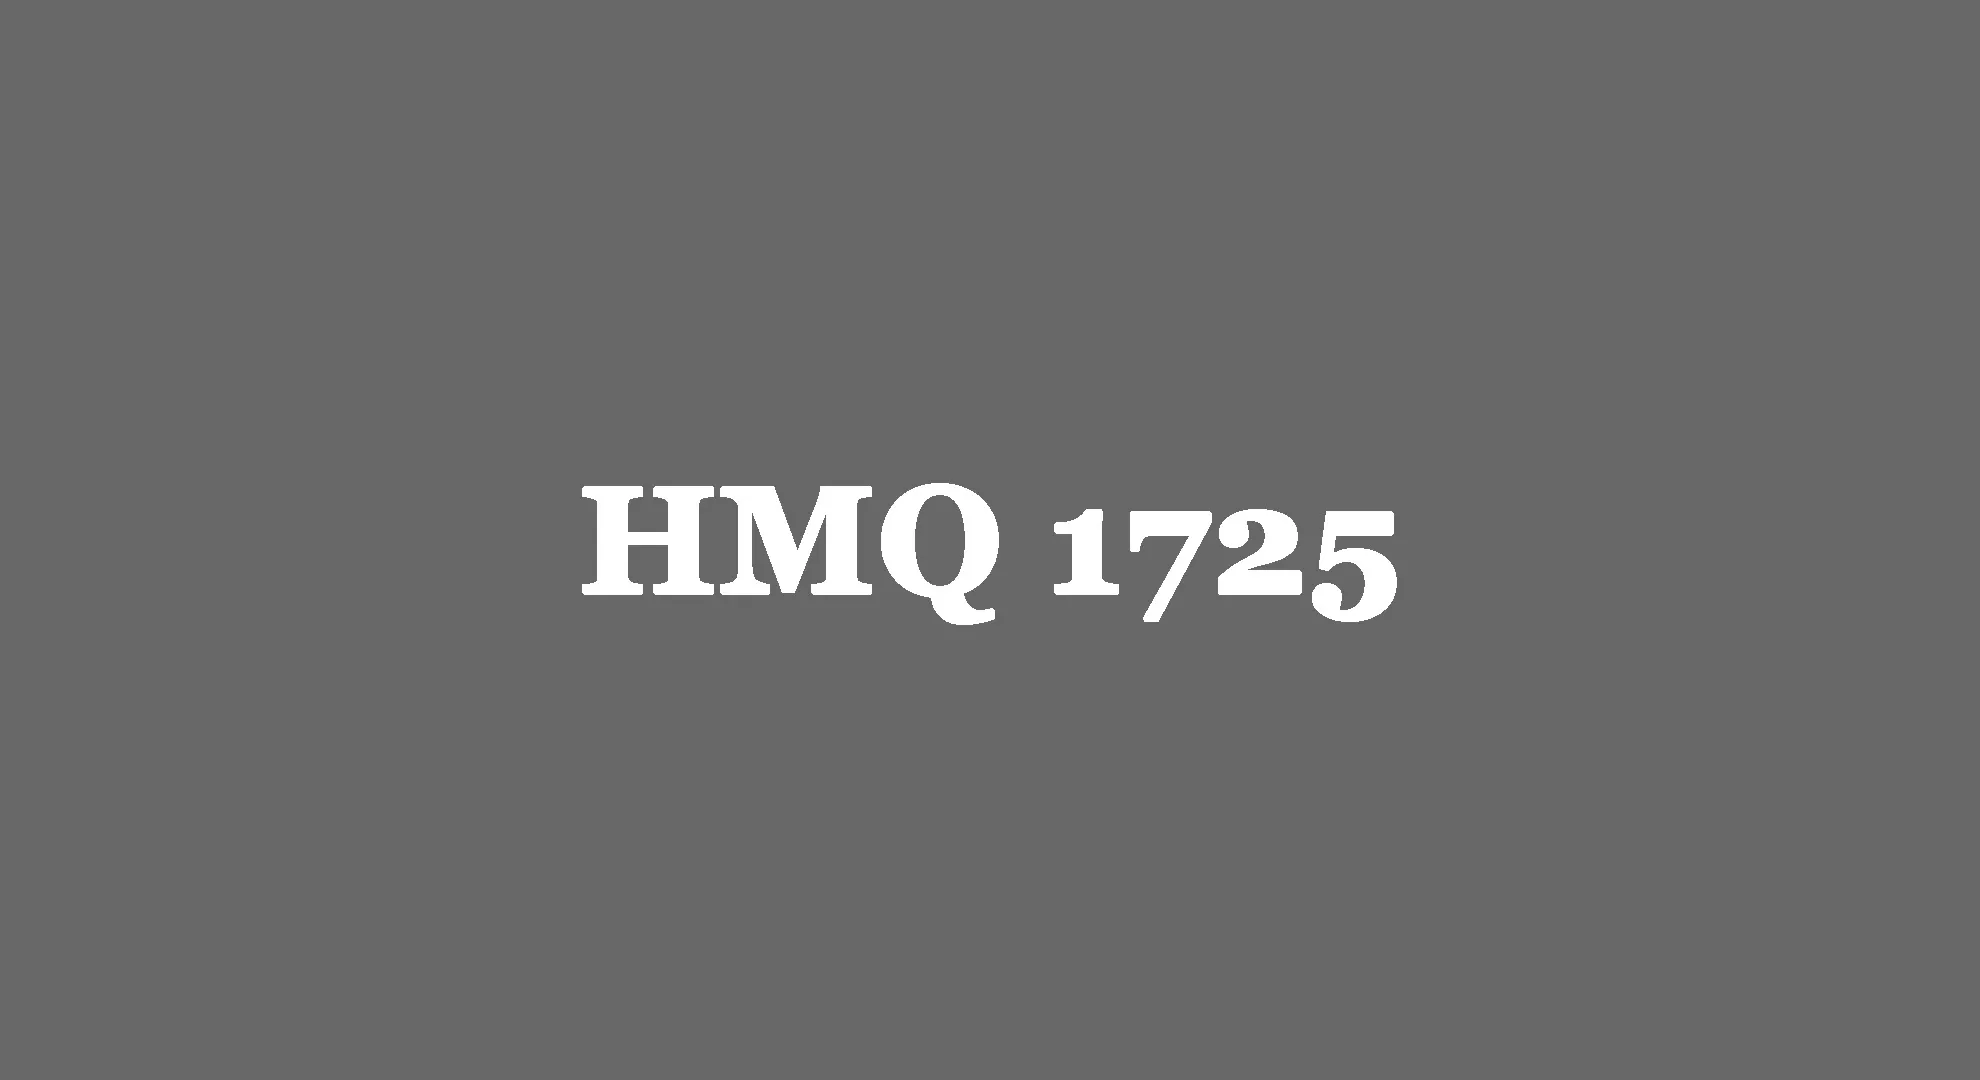 What is HMQ1725?